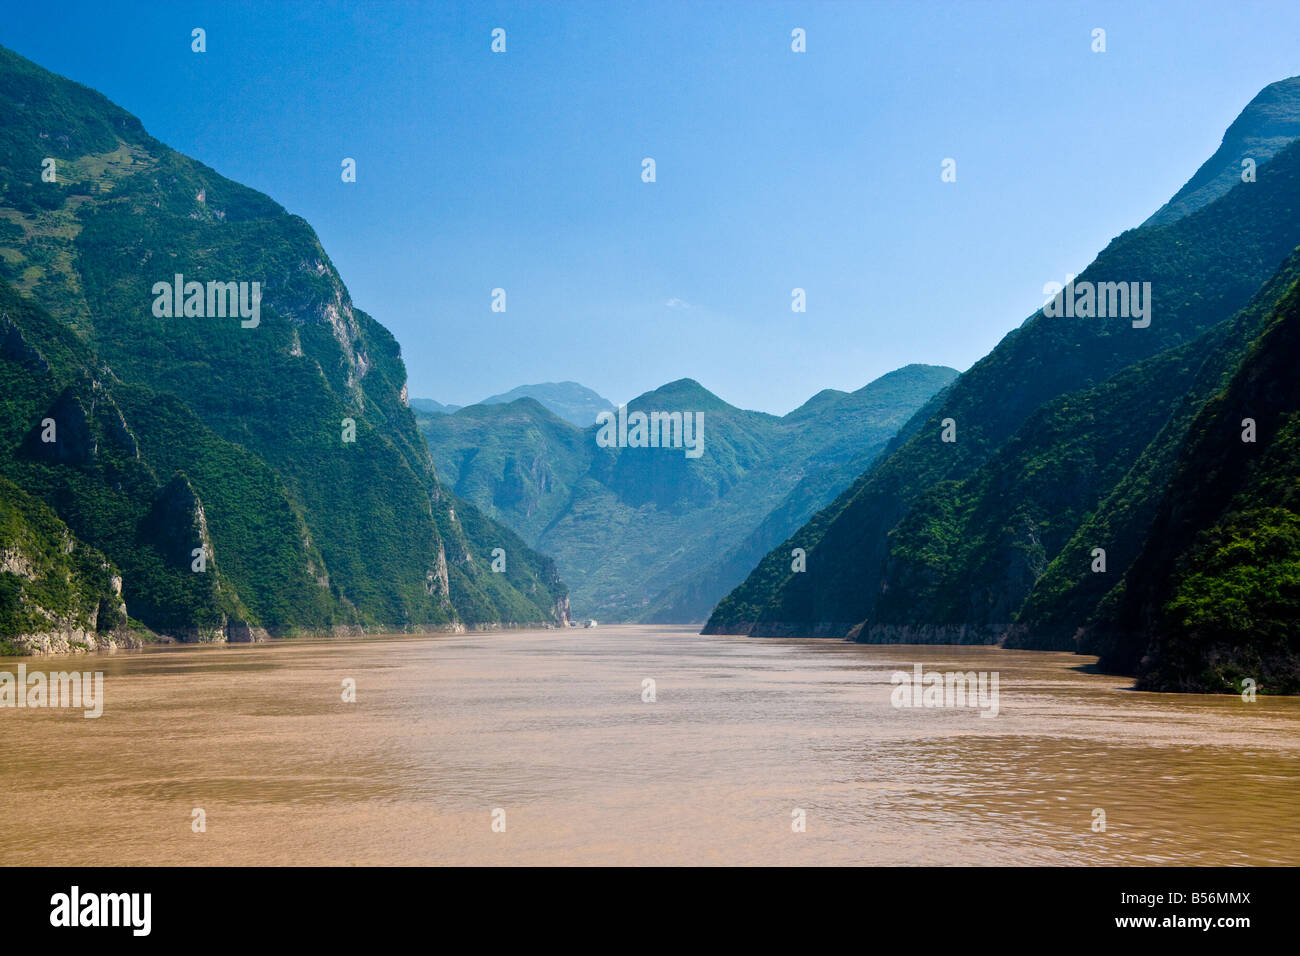 Entrance to the Wu Gorge in the Three Gorges area of the Yangzi River China JMH3408 Stock Photo